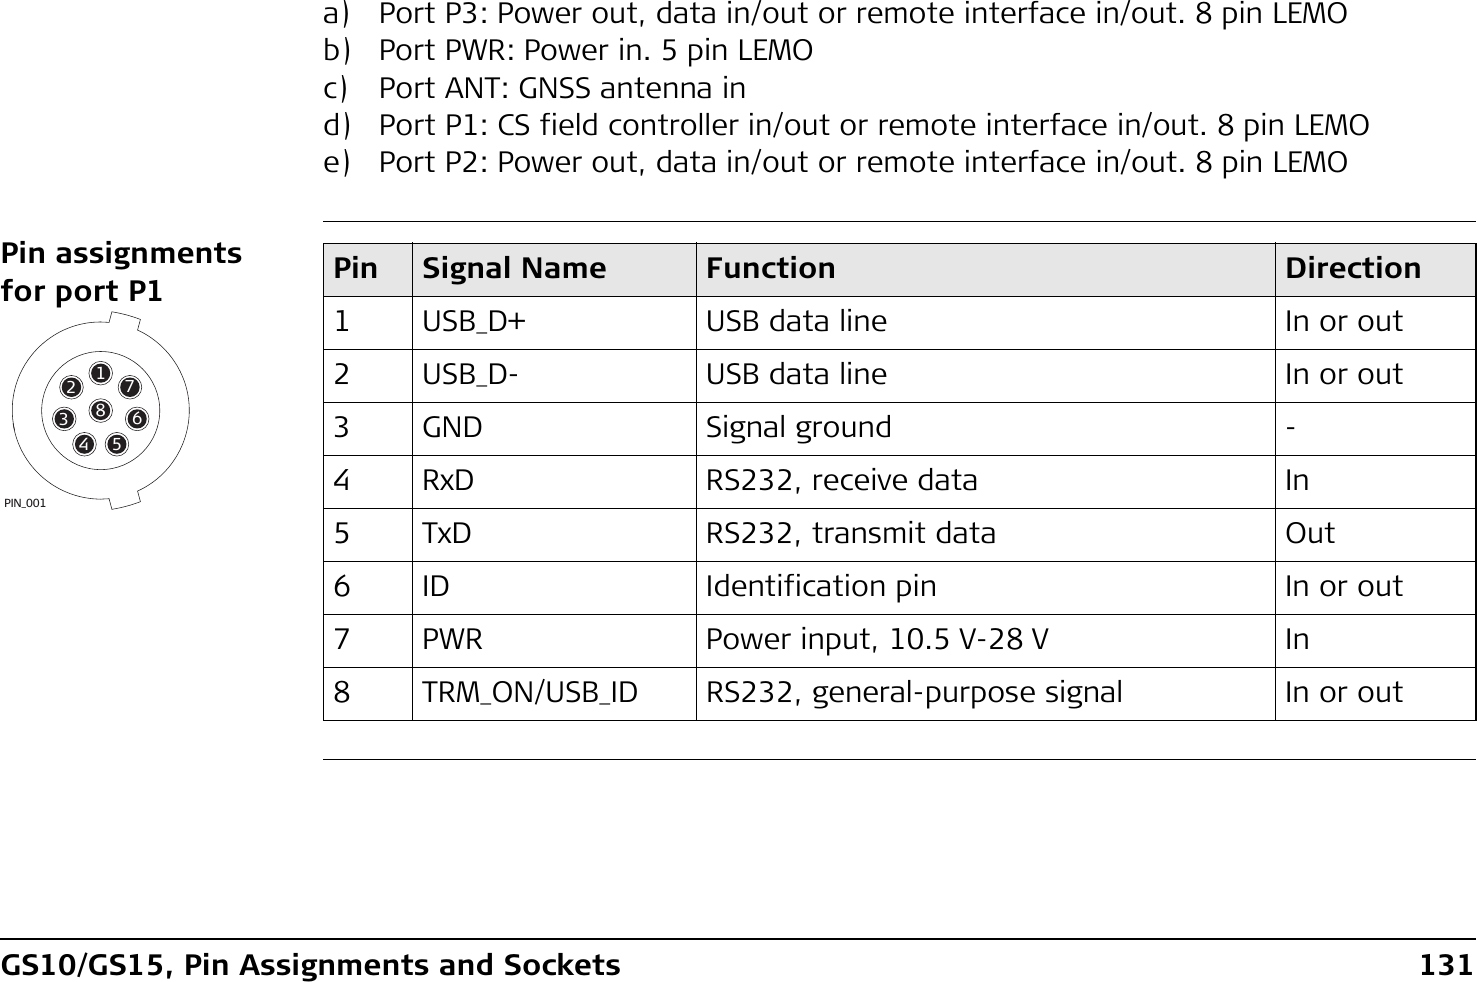 GS10/GS15, Pin Assignments and Sockets 131Pin assignments for port P1a) Port P3: Power out, data in/out or remote interface in/out. 8 pin LEMOb) Port PWR: Power in. 5 pin LEMOc) Port ANT: GNSS antenna ind) Port P1: CS field controller in/out or remote interface in/out. 8 pin LEMOe) Port P2: Power out, data in/out or remote interface in/out. 8 pin LEMO17685432PIN_001Pin Signal Name Function Direction1 USB_D+ USB data line In or out2 USB_D- USB data line In or out3 GND Signal ground -4 RxD RS232, receive data In5 TxD RS232, transmit data Out6 ID Identification pin In or out7 PWR Power input, 10.5 V-28 V In8 TRM_ON/USB_ID RS232, general-purpose signal In or out